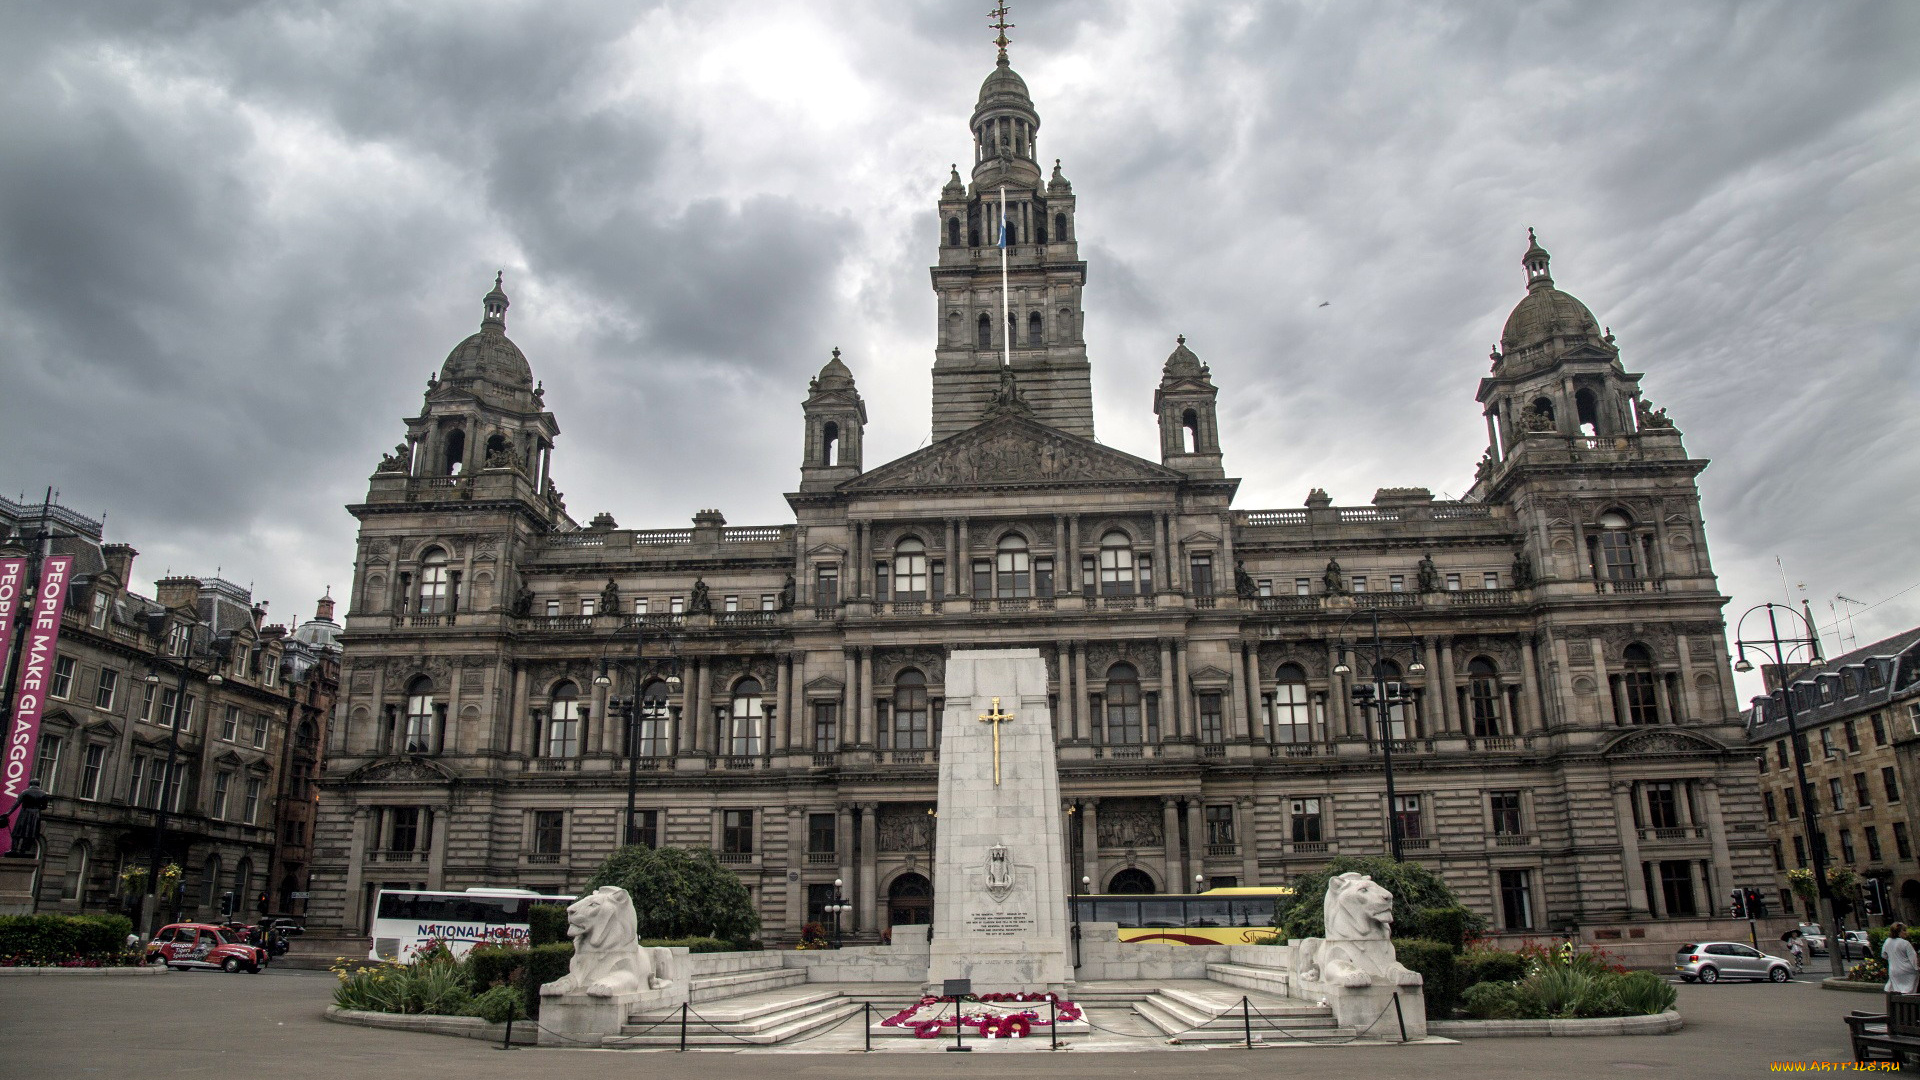 the, cenotaph, war, memorial, in, front, of, the, city, chambers, in, george, square, , glasgow, , scotland, города, -, исторические, , архитектурные, памятники, scotland, glasgow, the, cenotaph, war, memorial, in, front, of, city, chambers, george, square